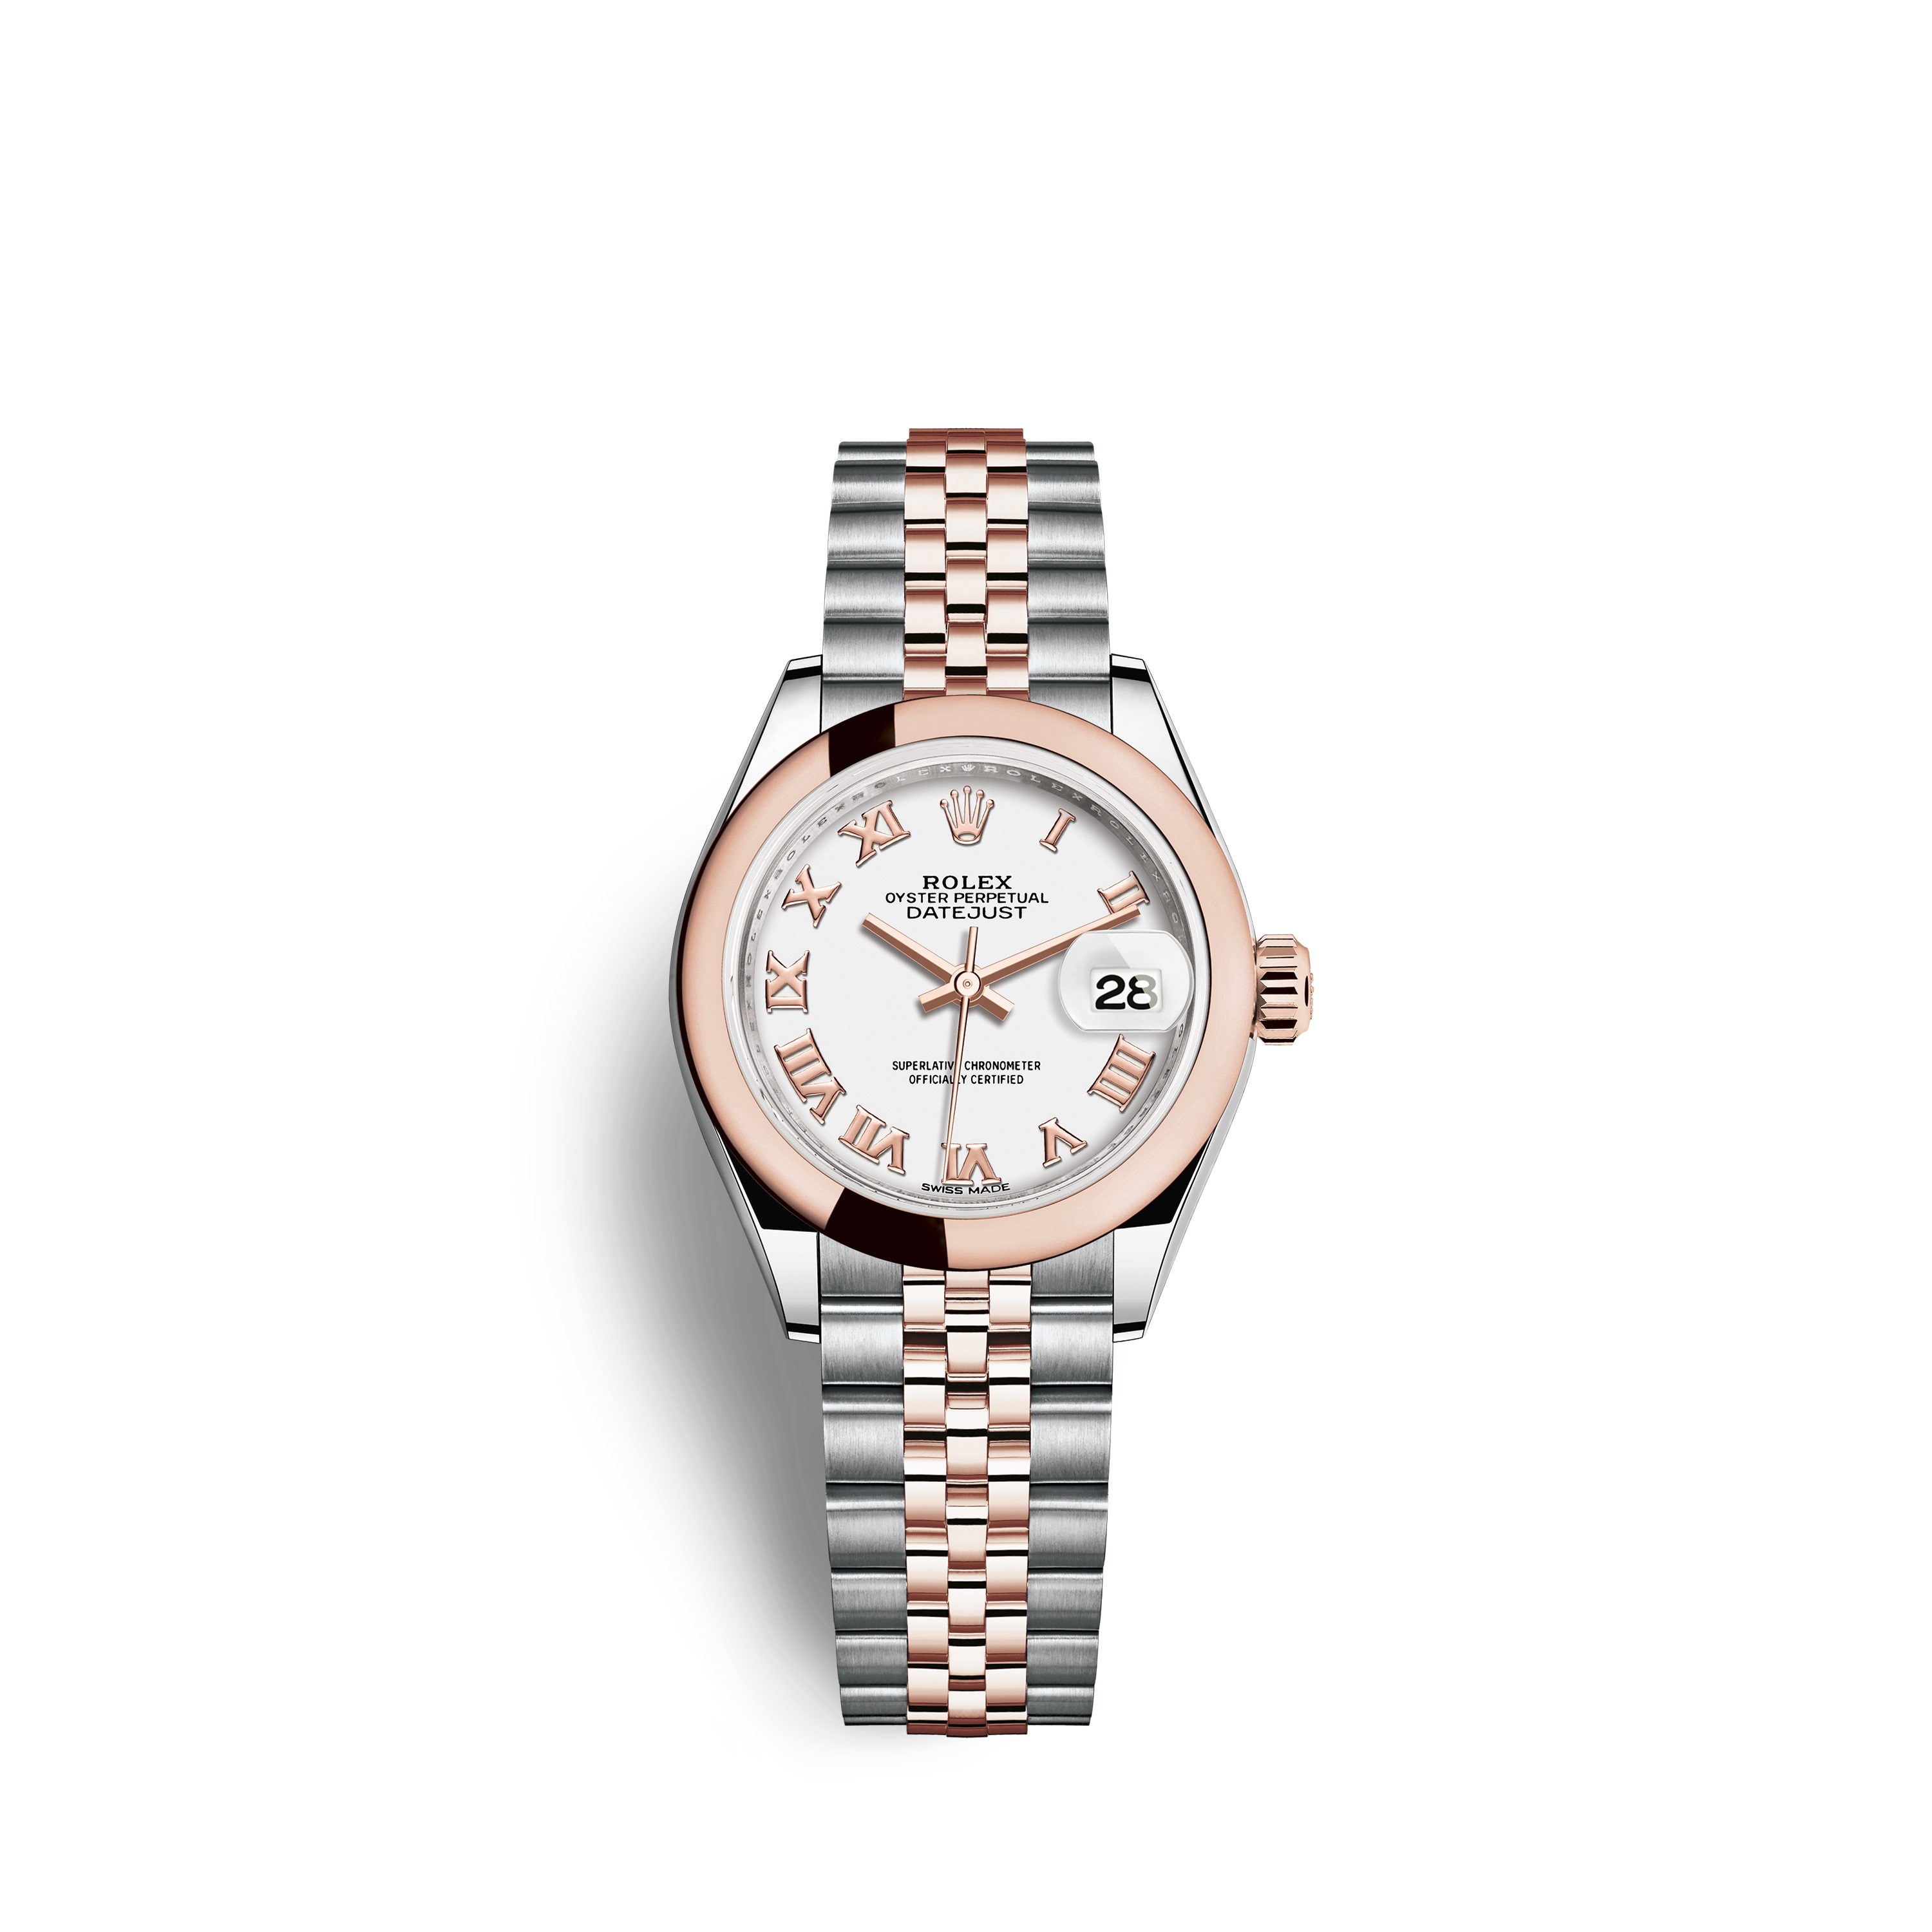 Lady-Datejust 28 279161 Rose Gold & Stainless Steel Watch (White)